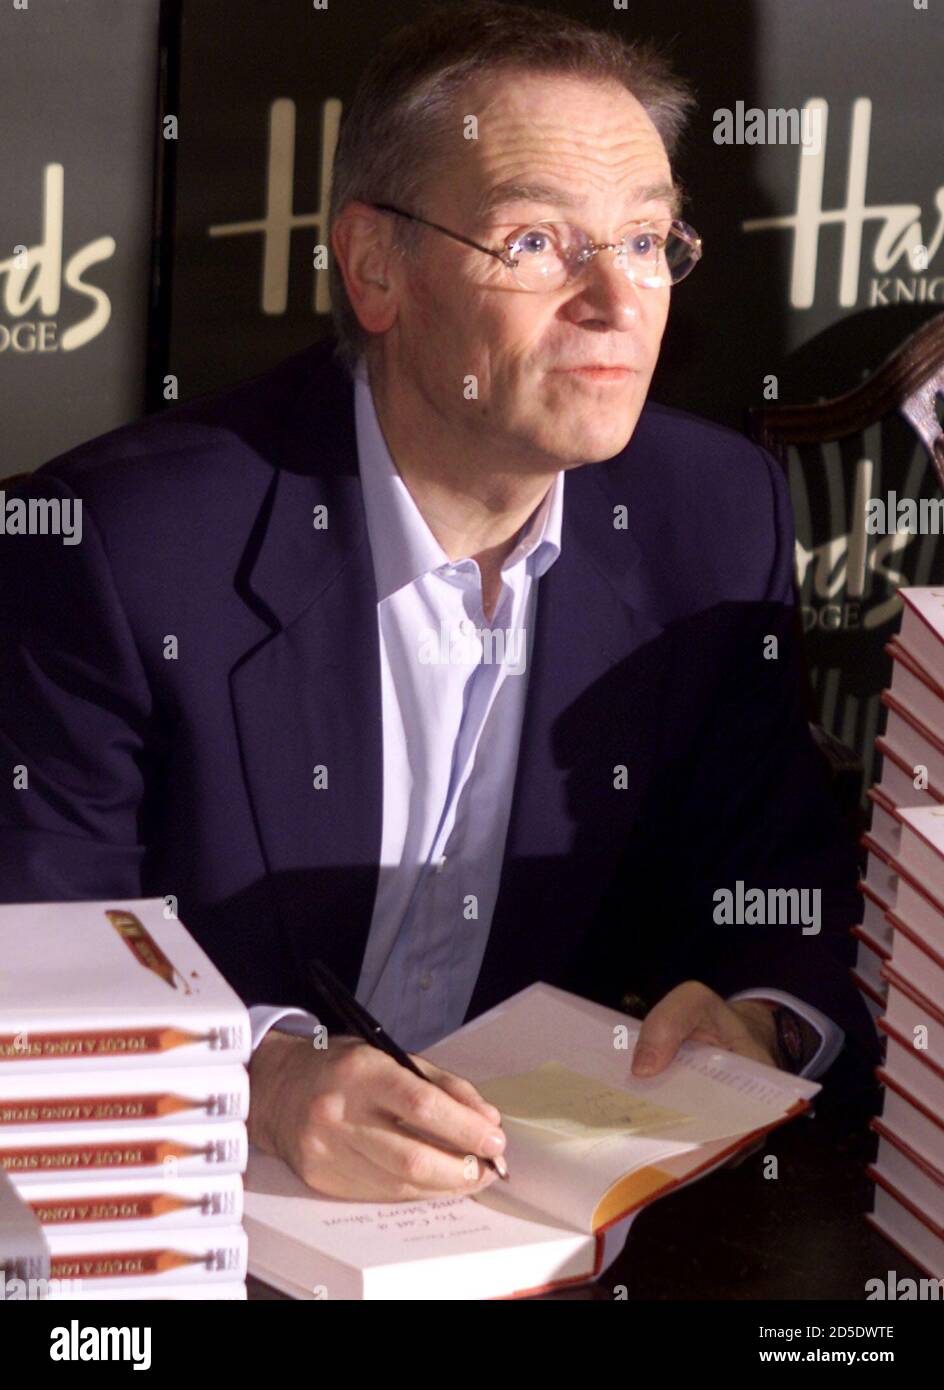 Novelist and disgraced politician Jeffrey Archer attends a book signing  promotion for his new novel "To cut a long story Short" at Harrods  department store in central London April 15. Archer was arrested and  released on bail earlier in the month over ...